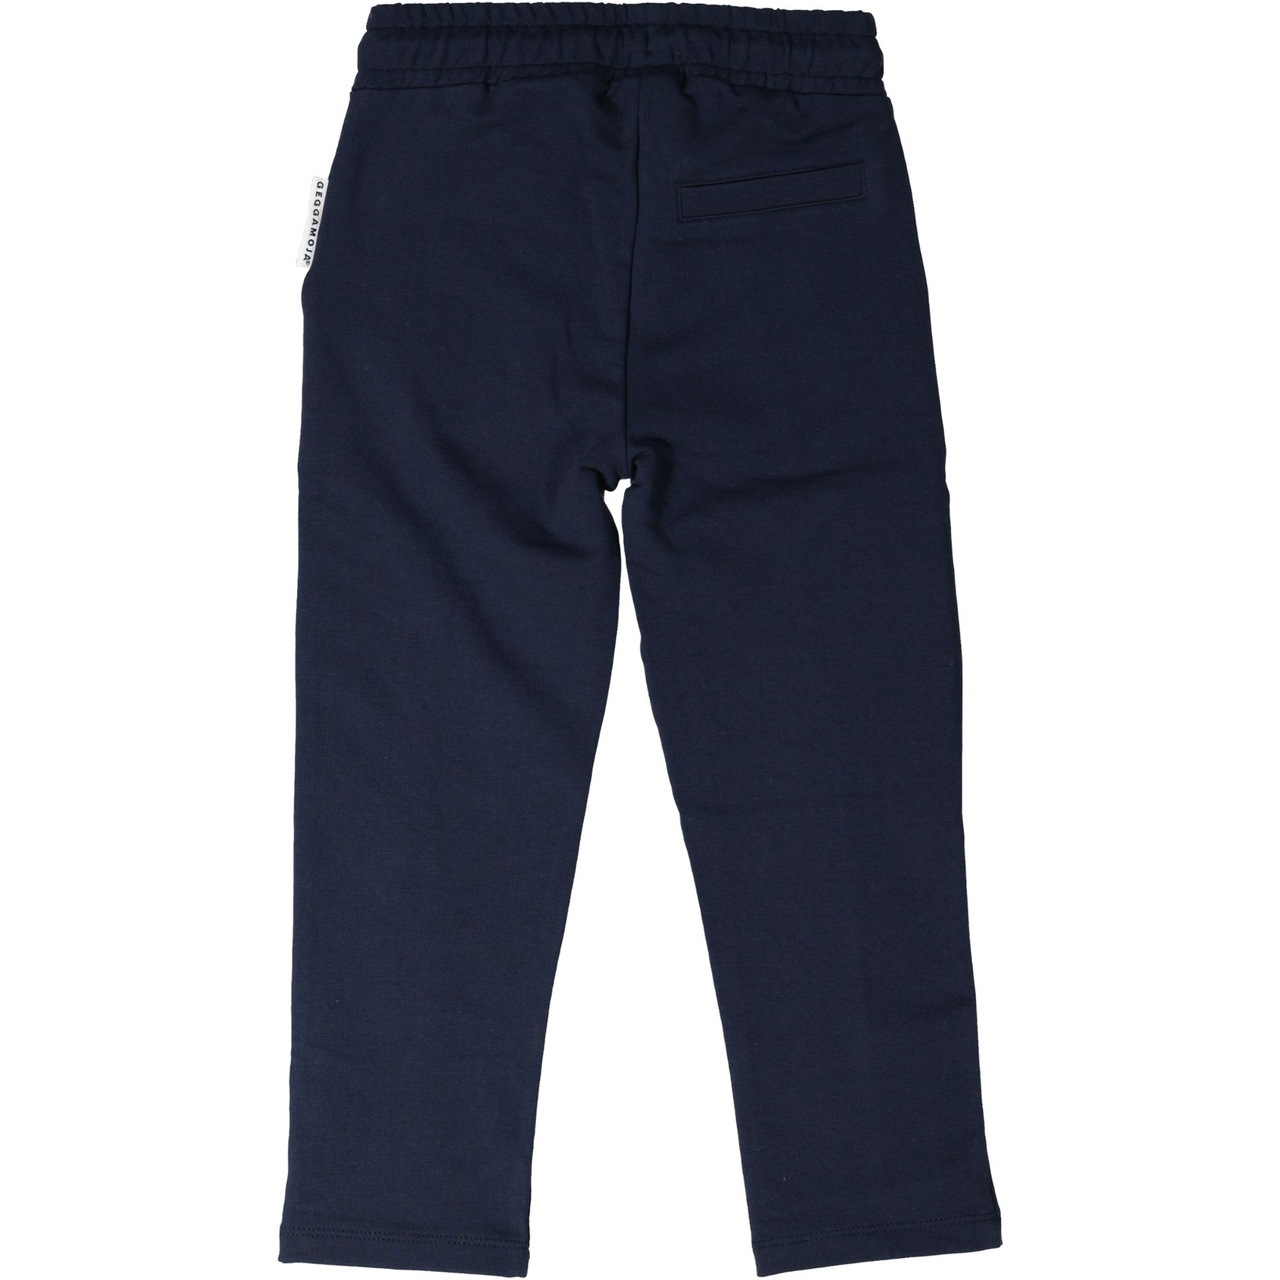 College trousers Navy  146/152